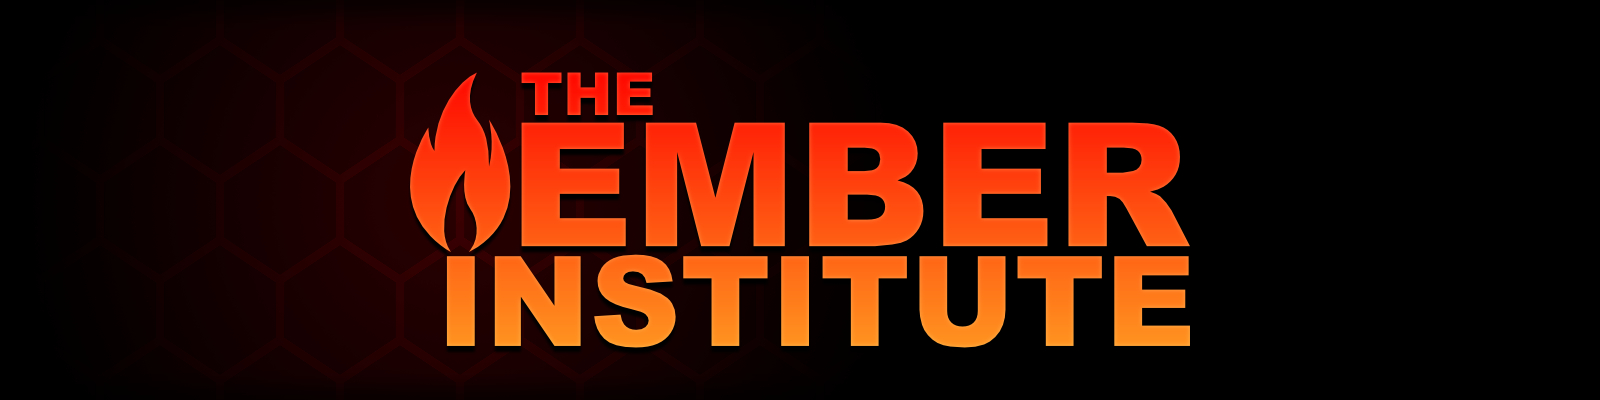 The Ember Institute poster